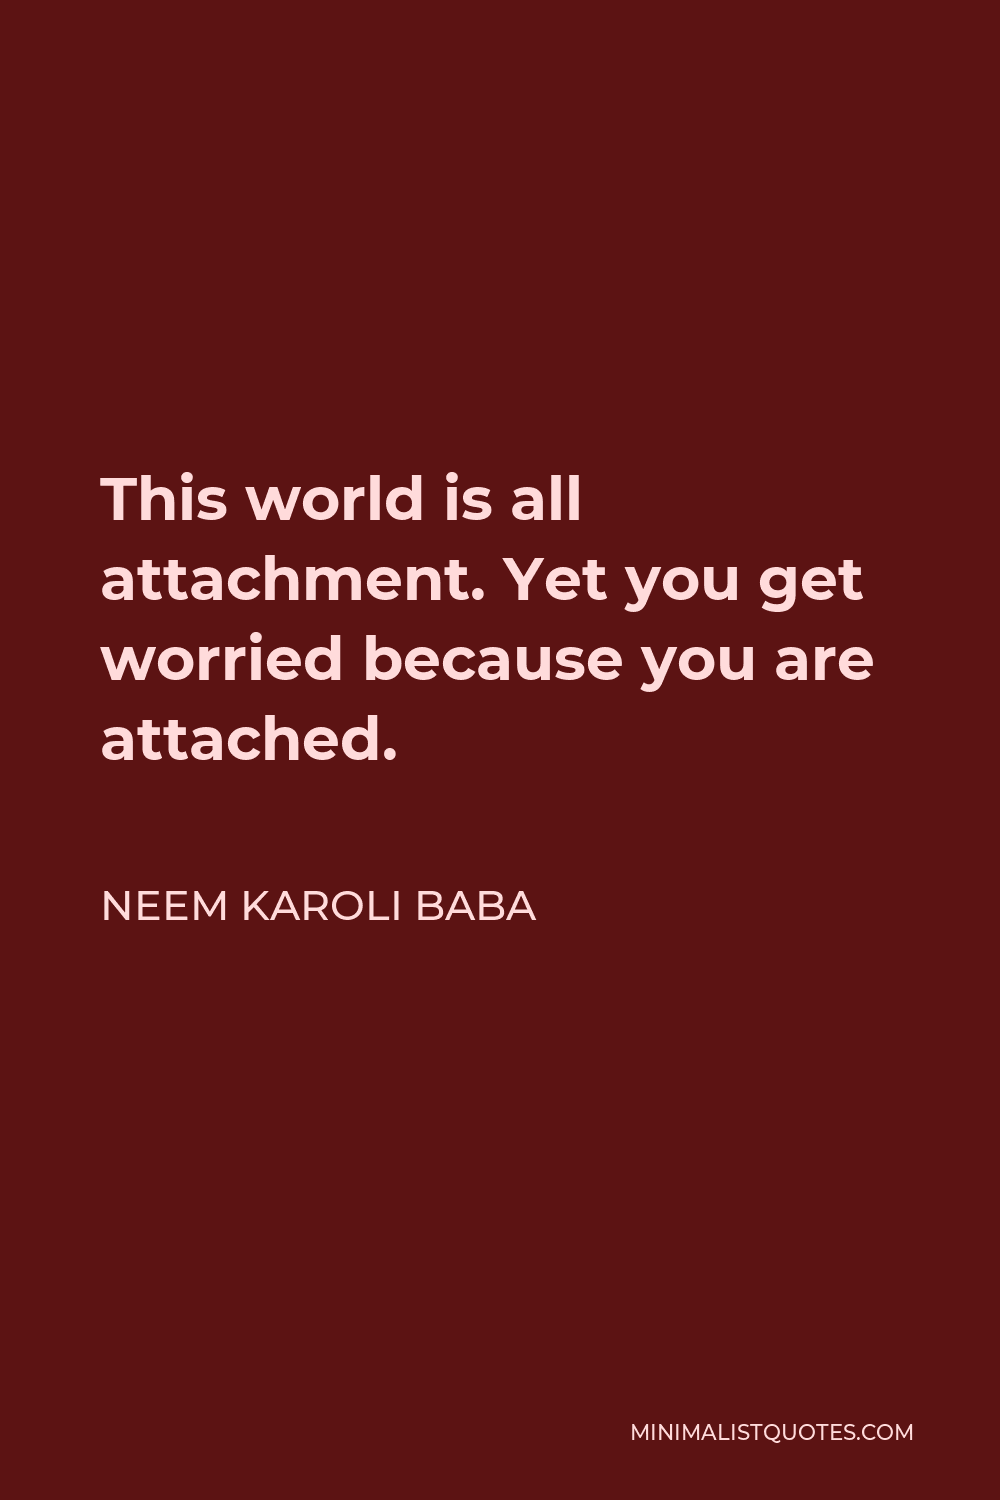 Neem Karoli Baba Quote - This world is all attachment. Yet you get worried because you are attached.